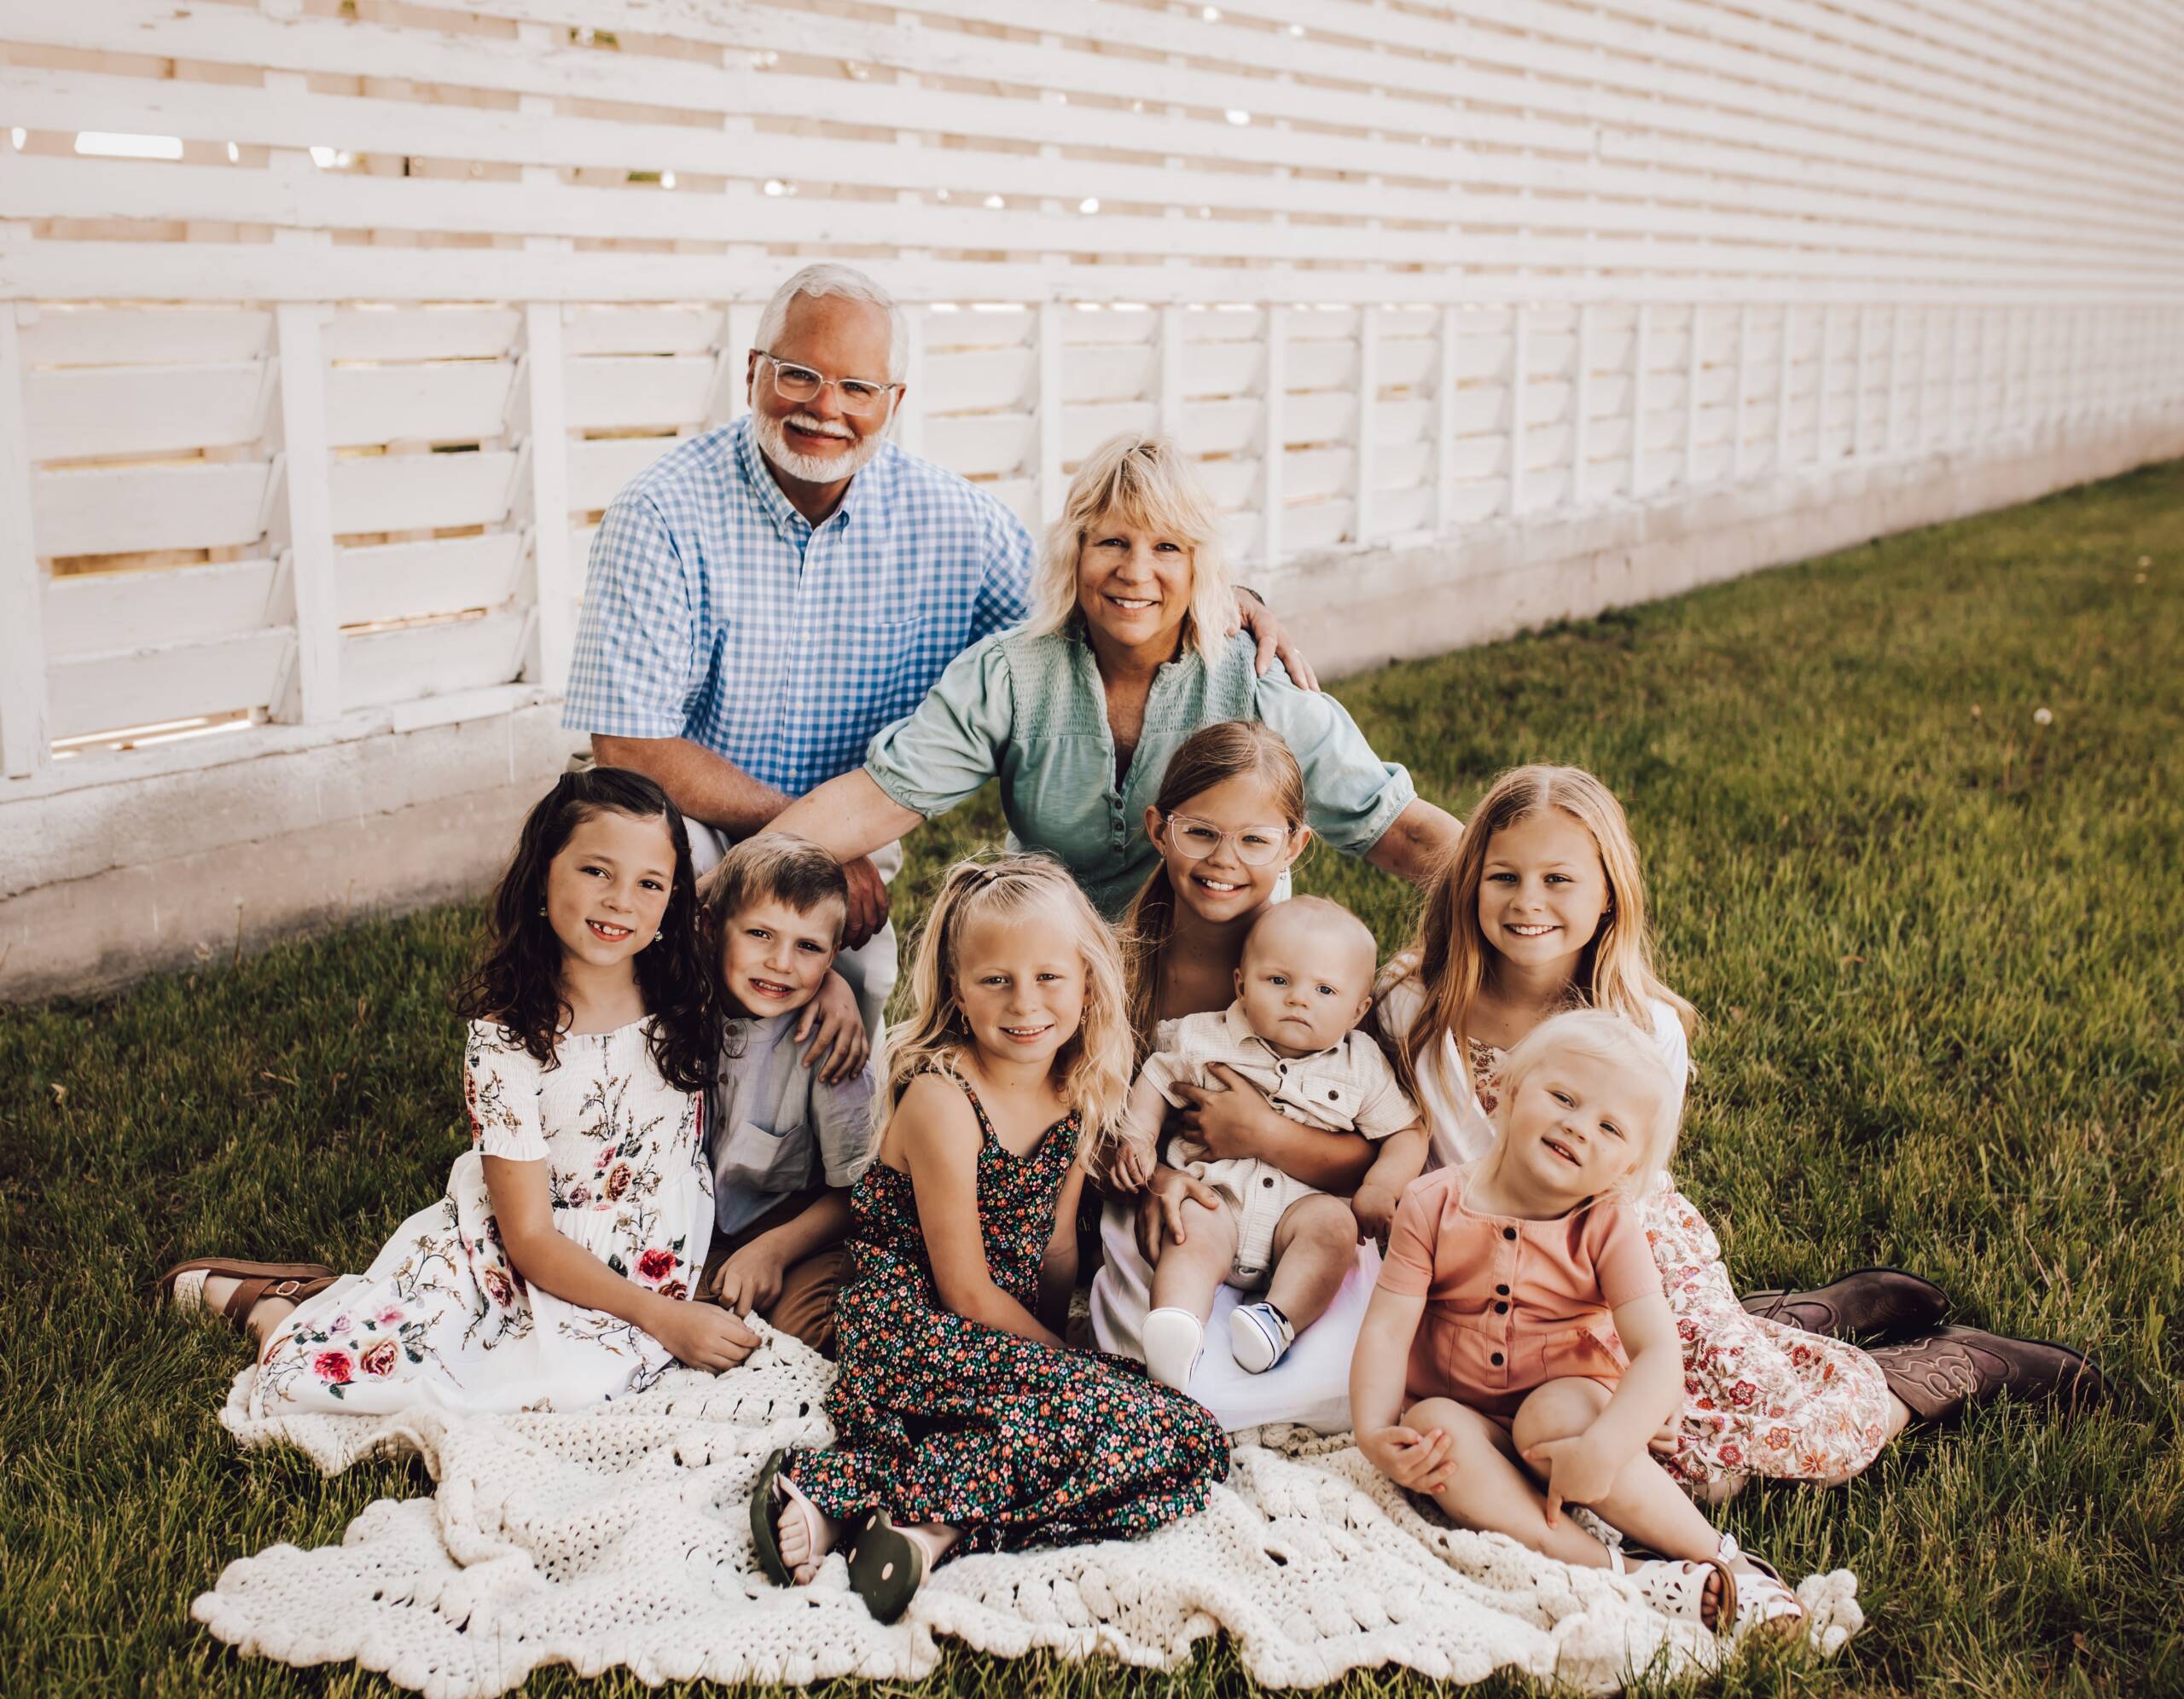 Mary with her husband and grandchildren.